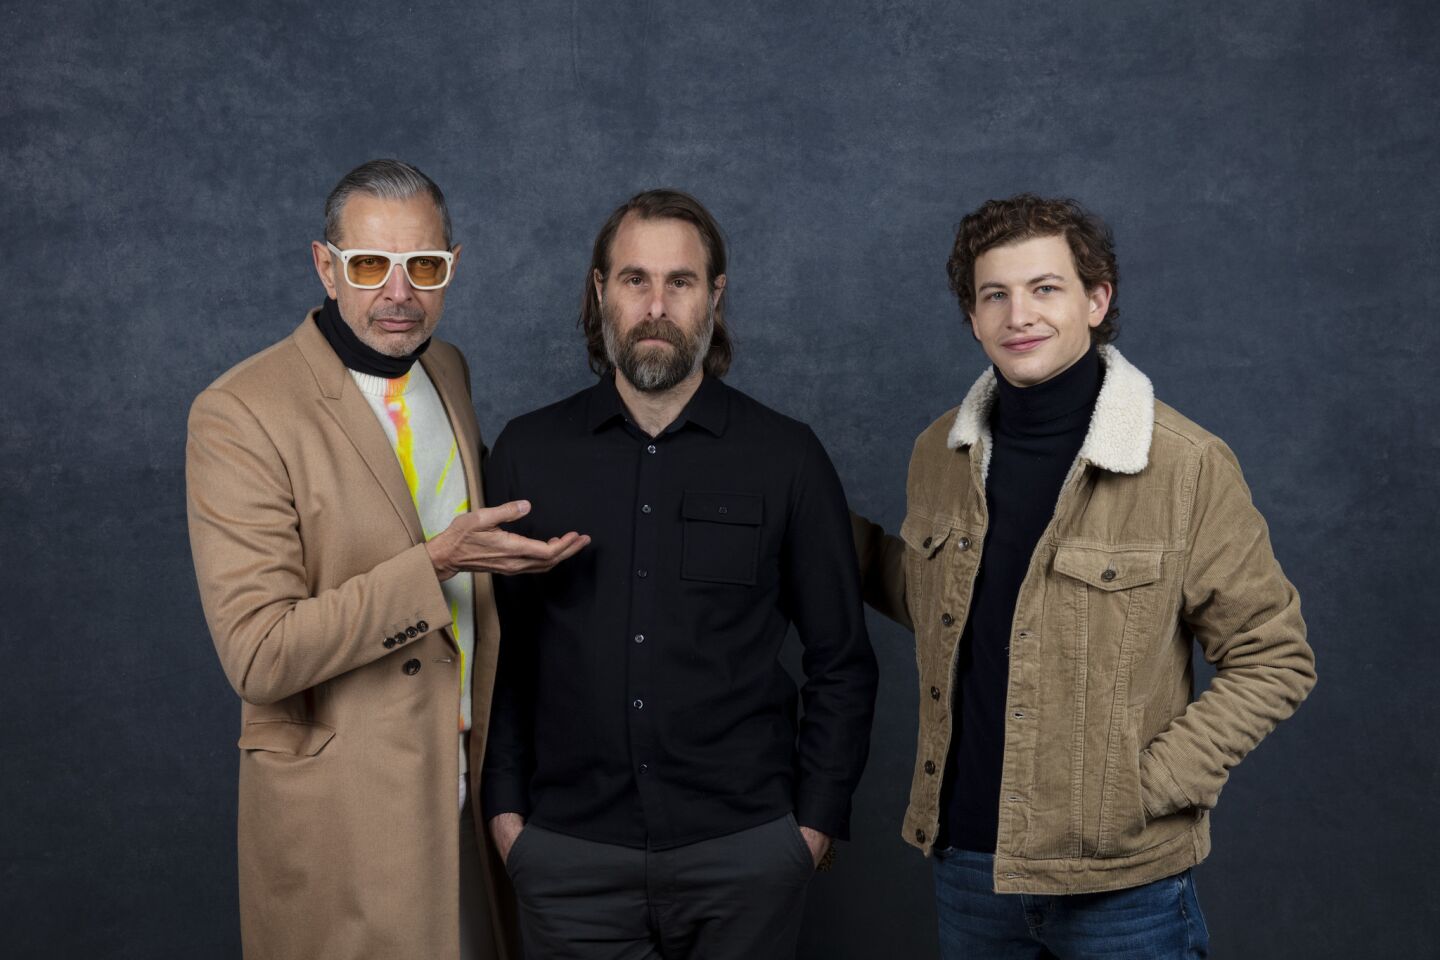 Actor Jeff Goldblum, director Rick Alverson and actor Tye Sheridan from the film "The Mountain."